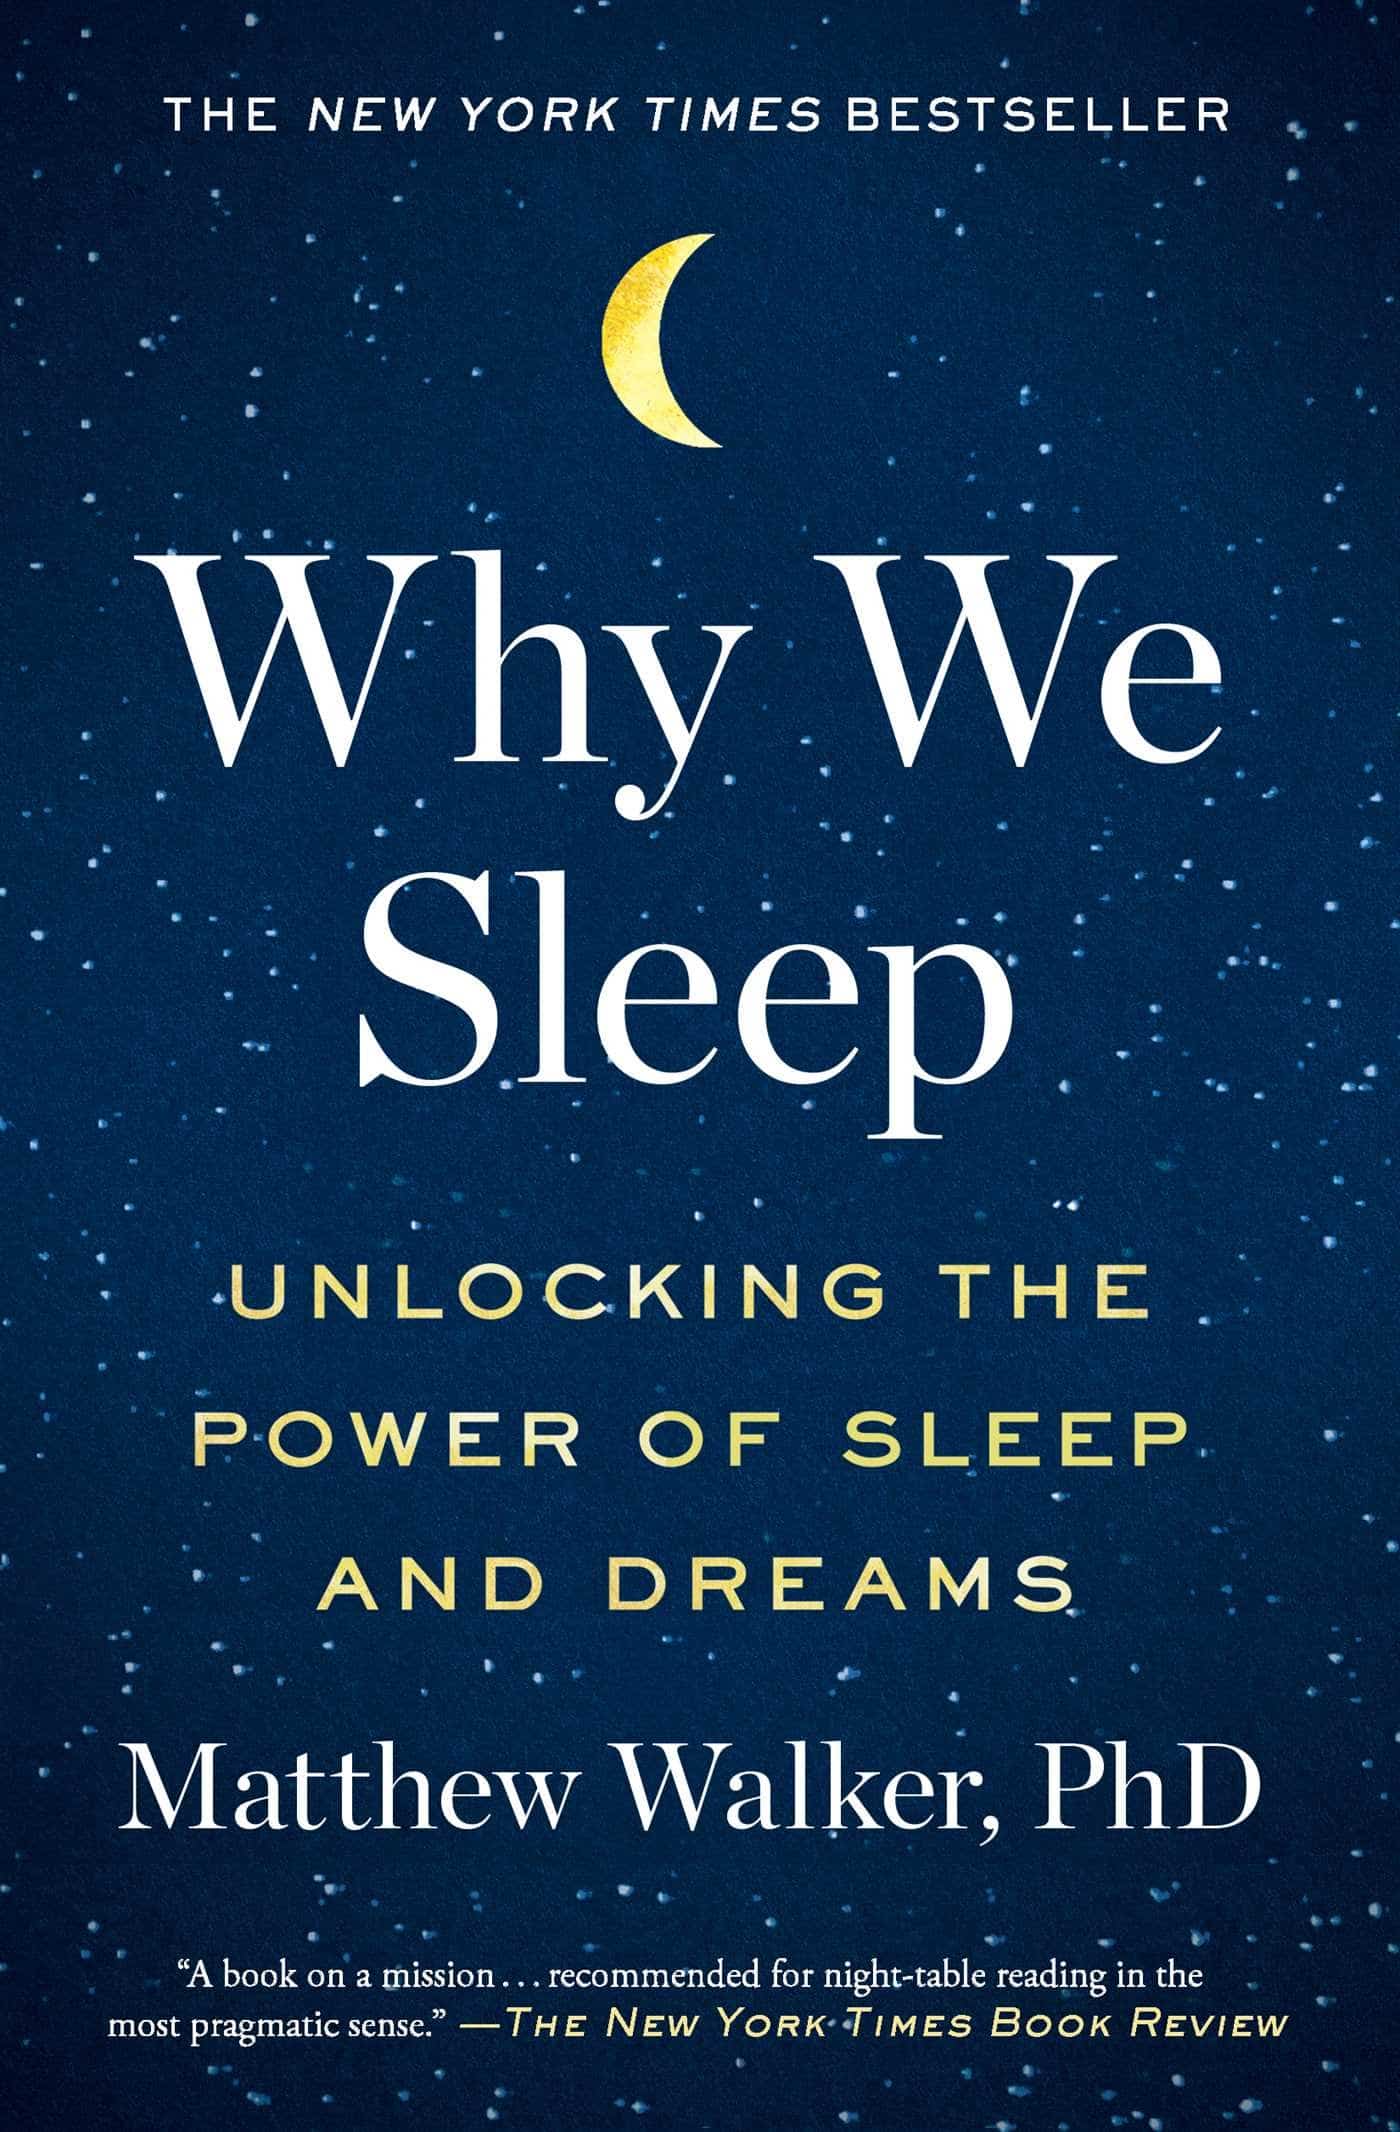 The cover of Why We Sleep